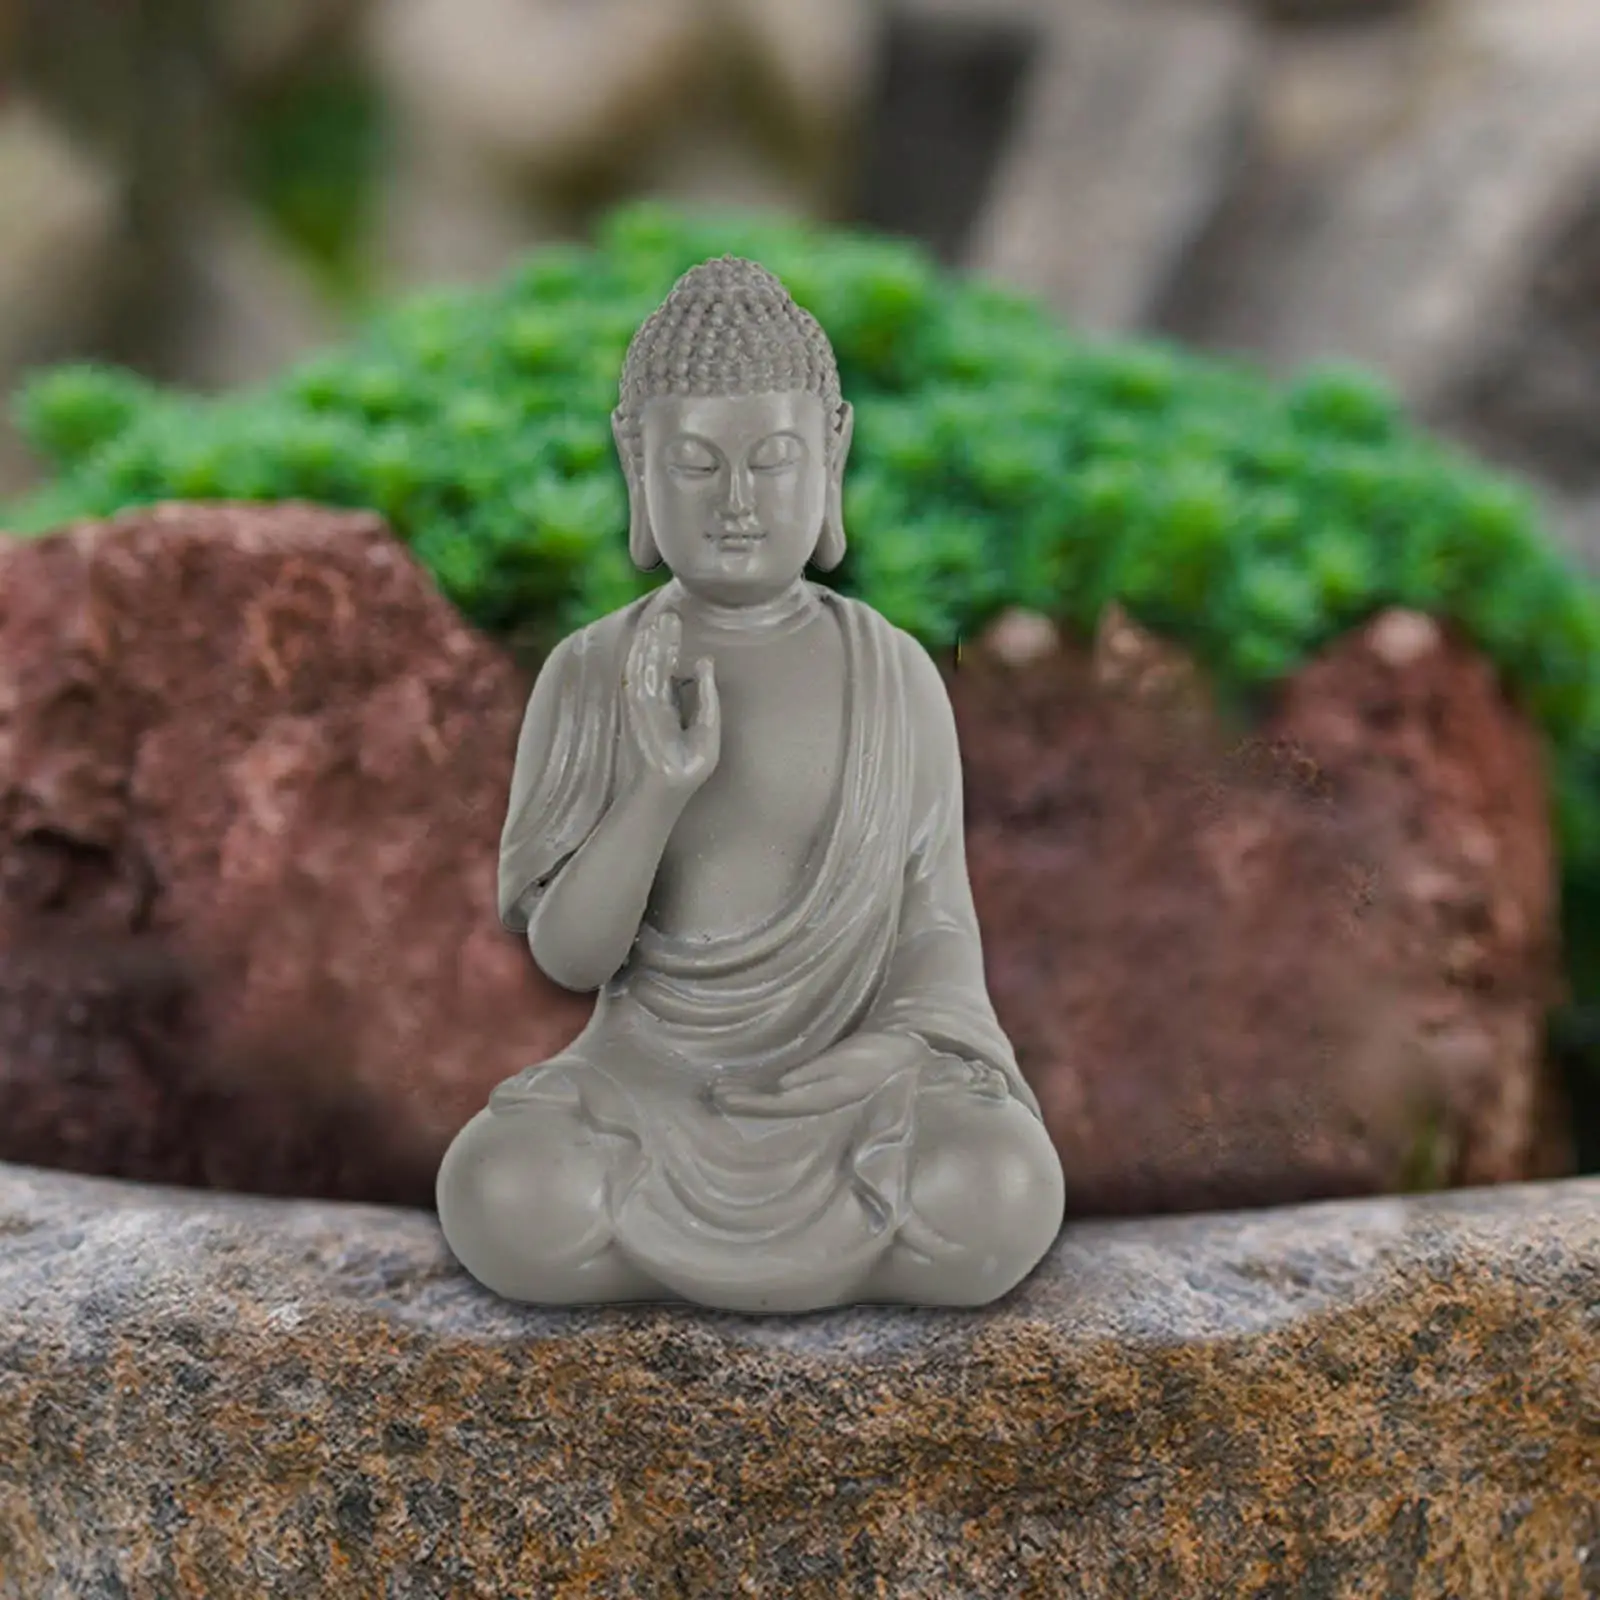 Buddha Resin Statue Meditating Figurines Sculpture Living Room Handcrafted Collectible Sculpture for Office Shop Hotel Lawn Deck